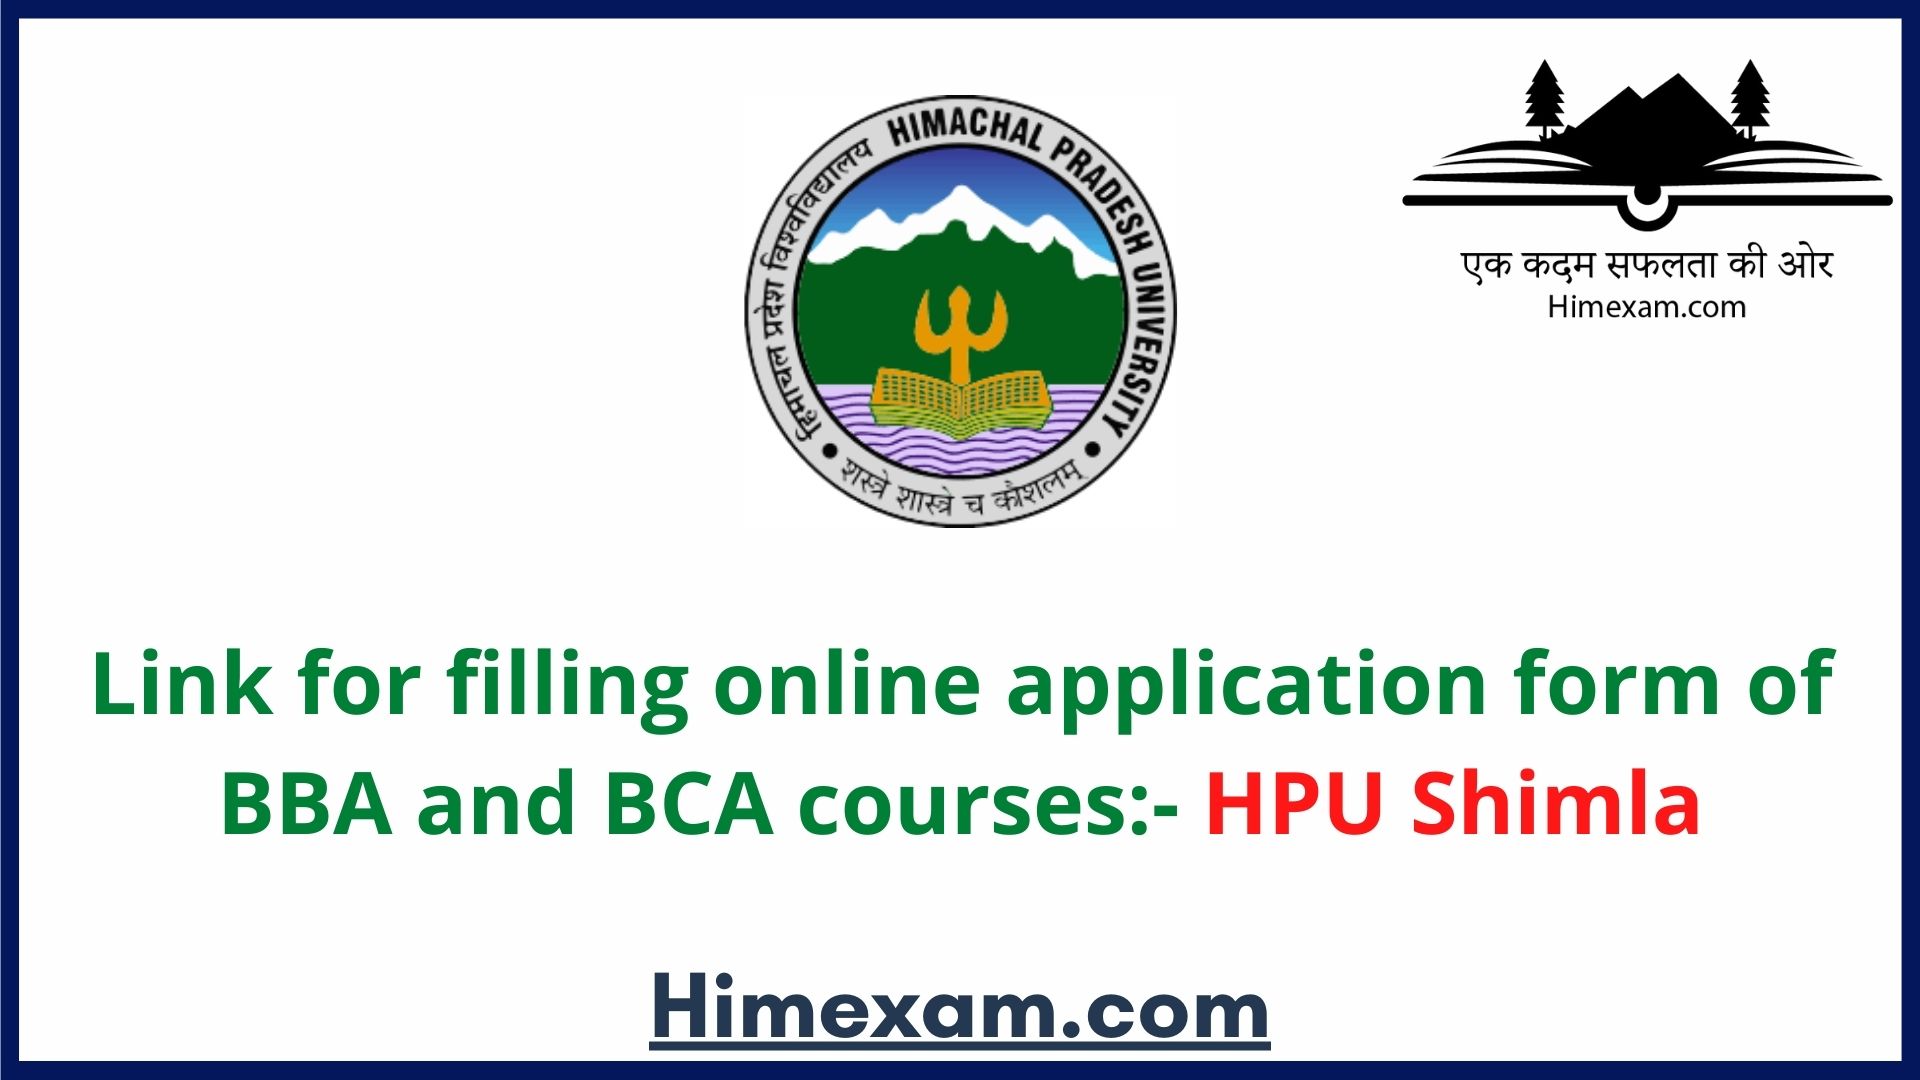 Link for filling online application form of BBA and BCA courses:- HPU Shimla